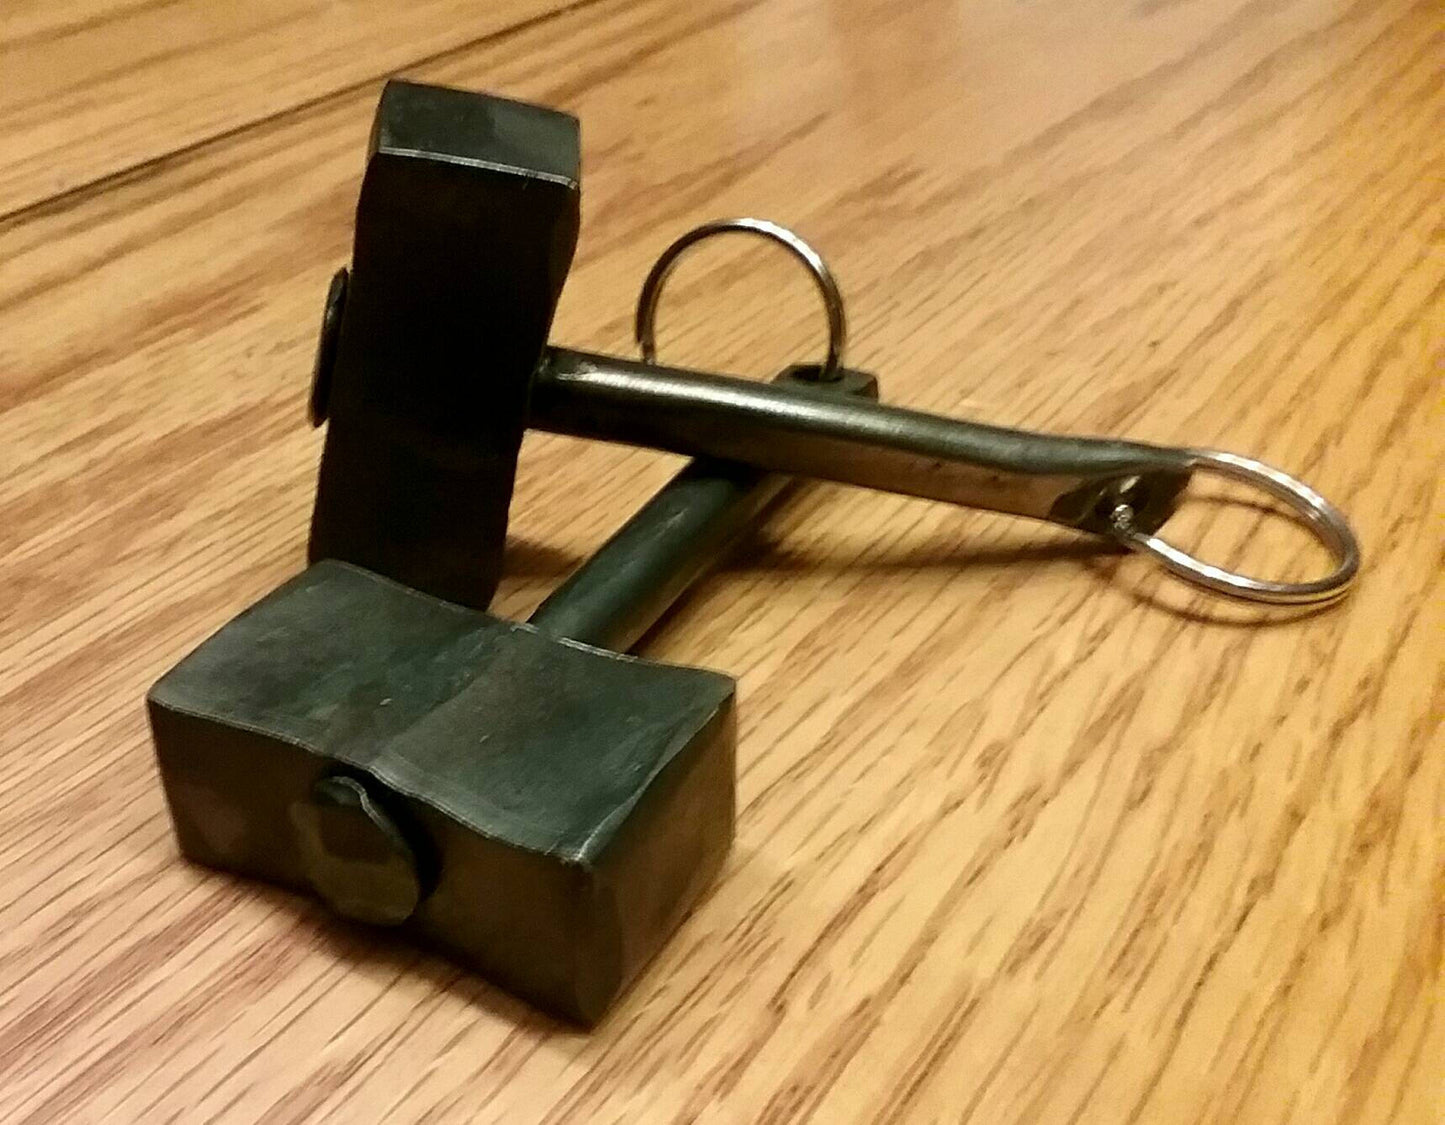 Hand Forged Thor's Hammer Keychain